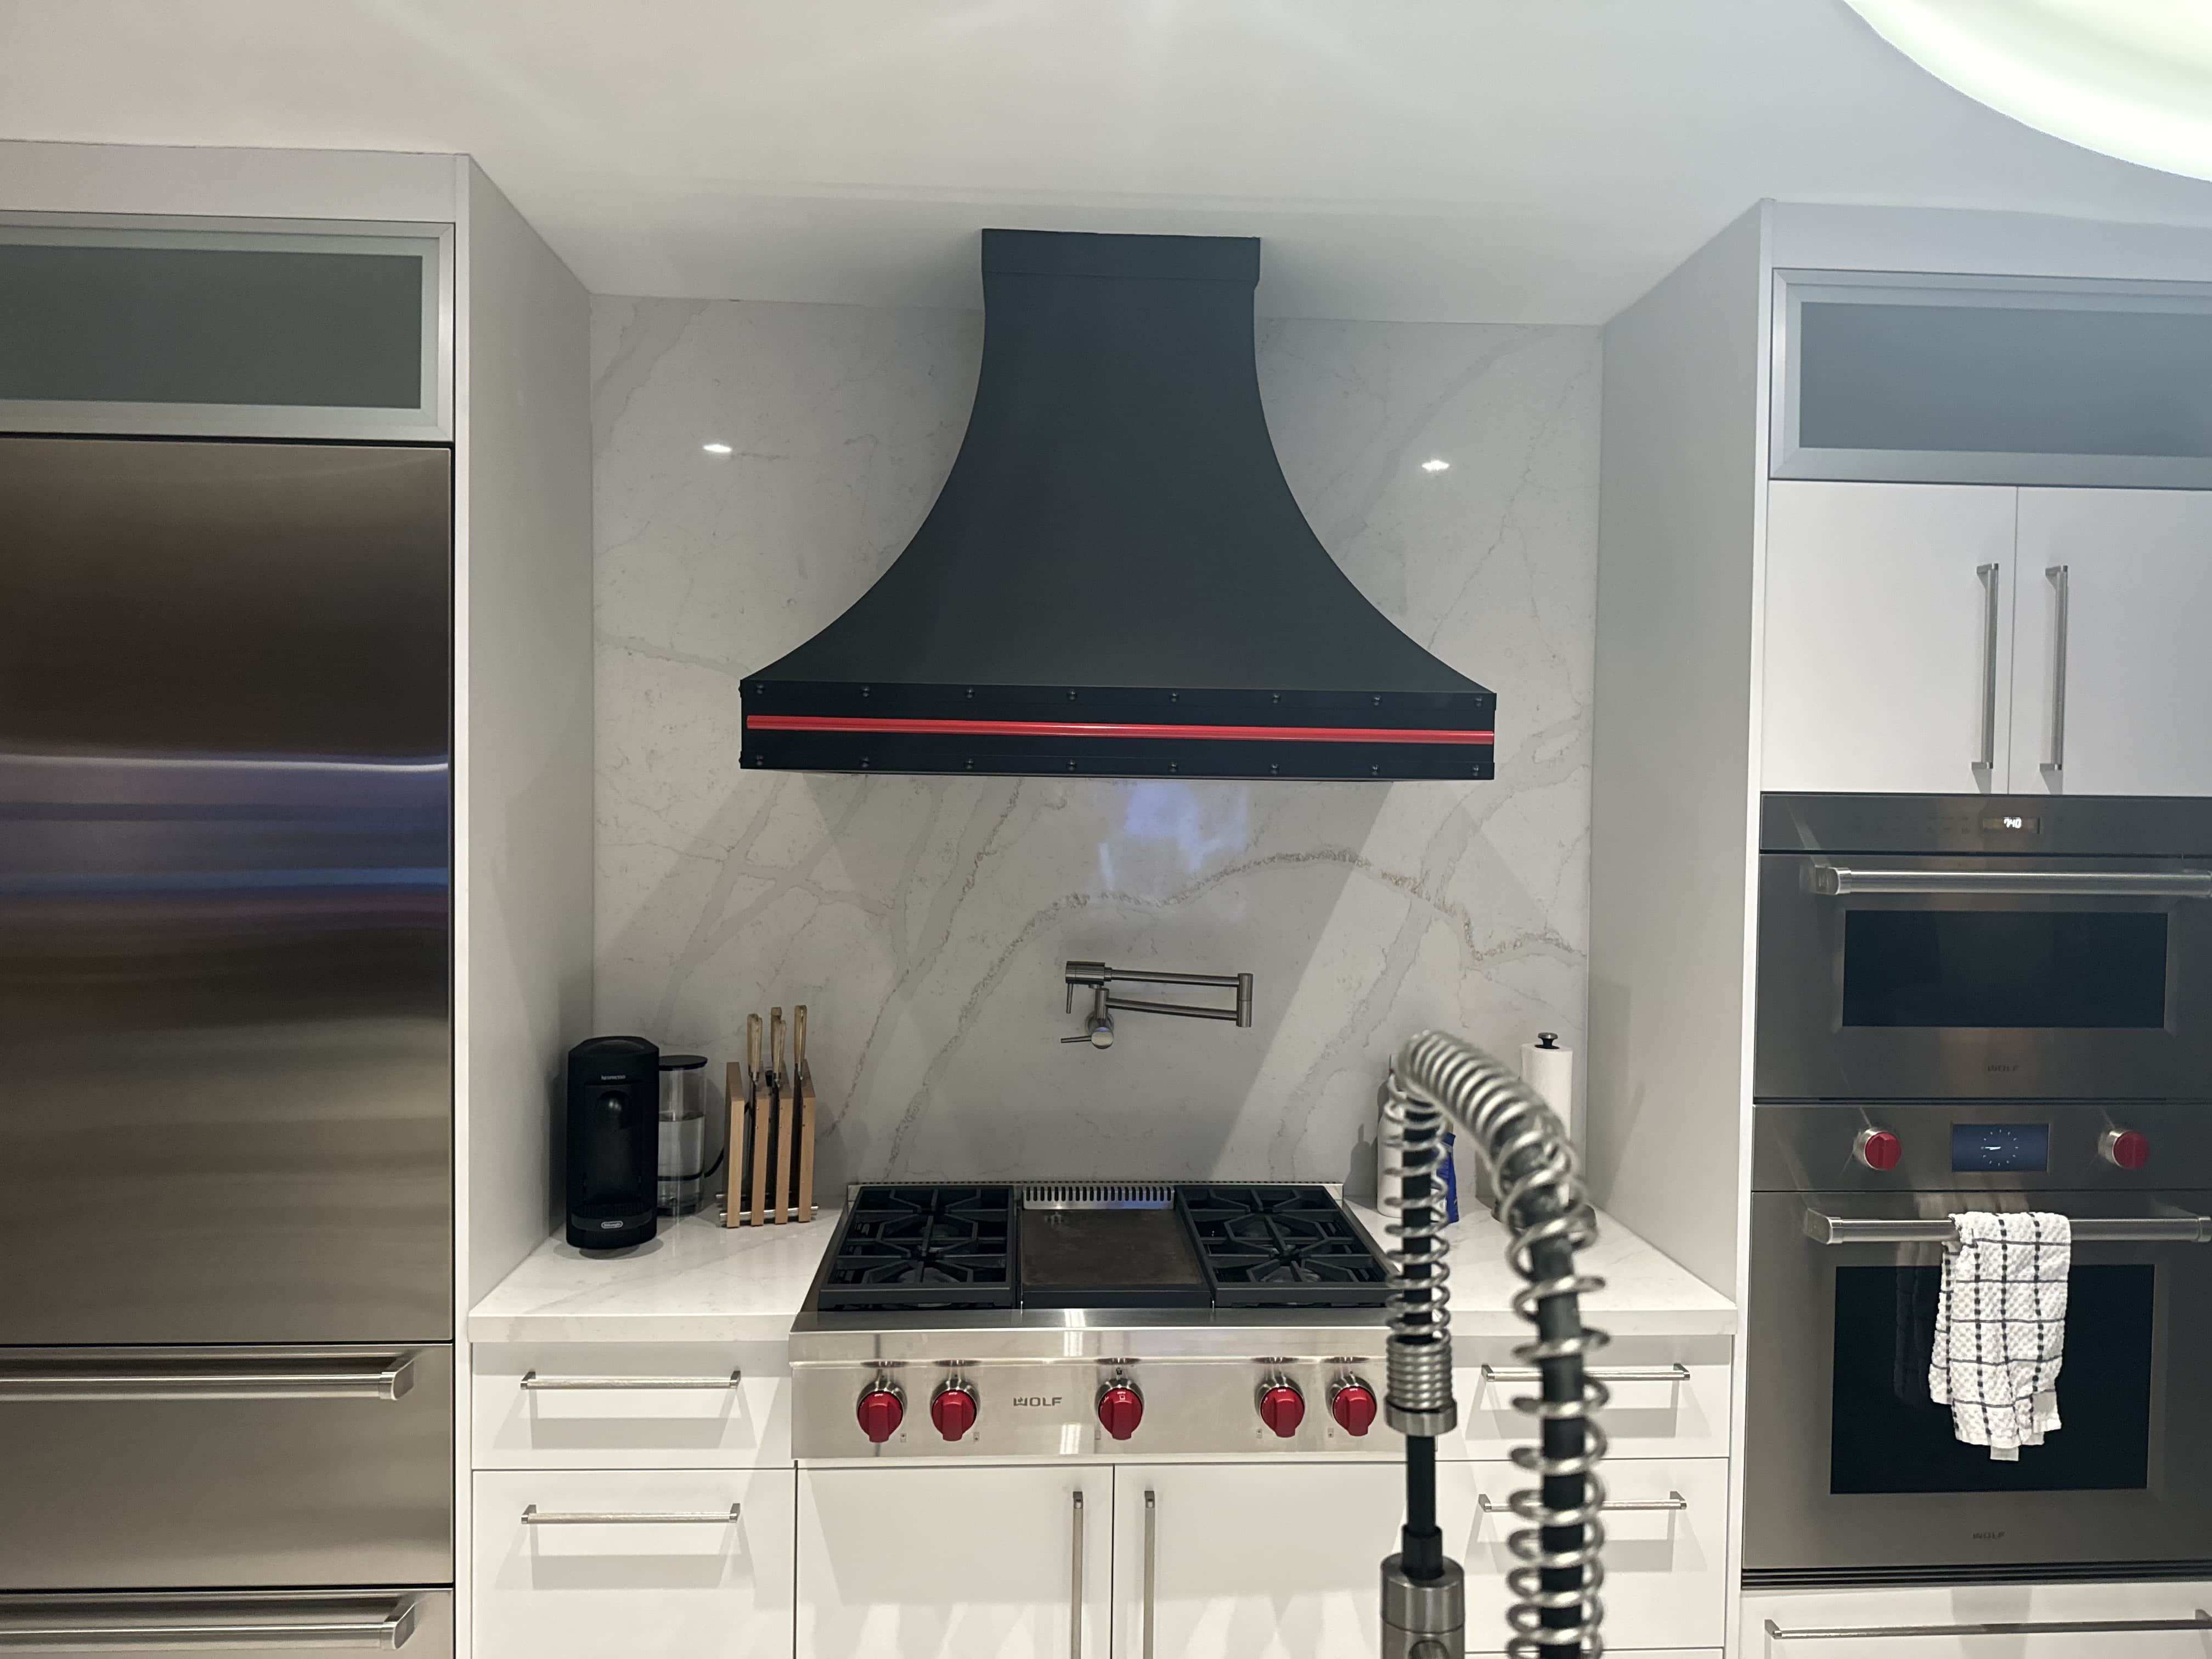 CopperSmith Euro ES3 Wall Mount Stainless Steel Black Enamel with RAL 3001 Signal Red Rivets and Pot Rail in a modern kitchen with Marble Backsplash , white countertops and cabinets